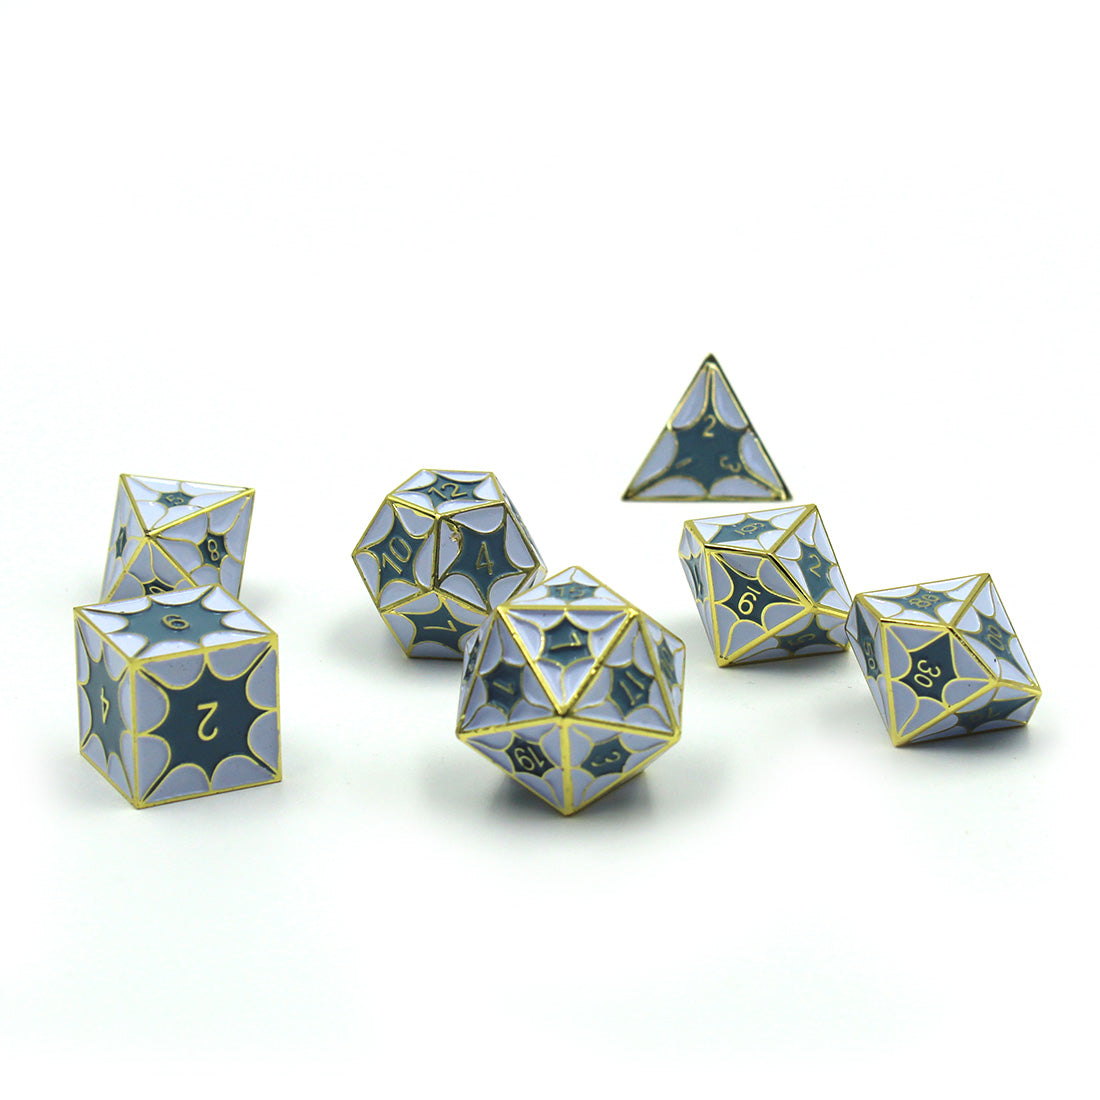 DragonScale Dice Set with gold numbers.